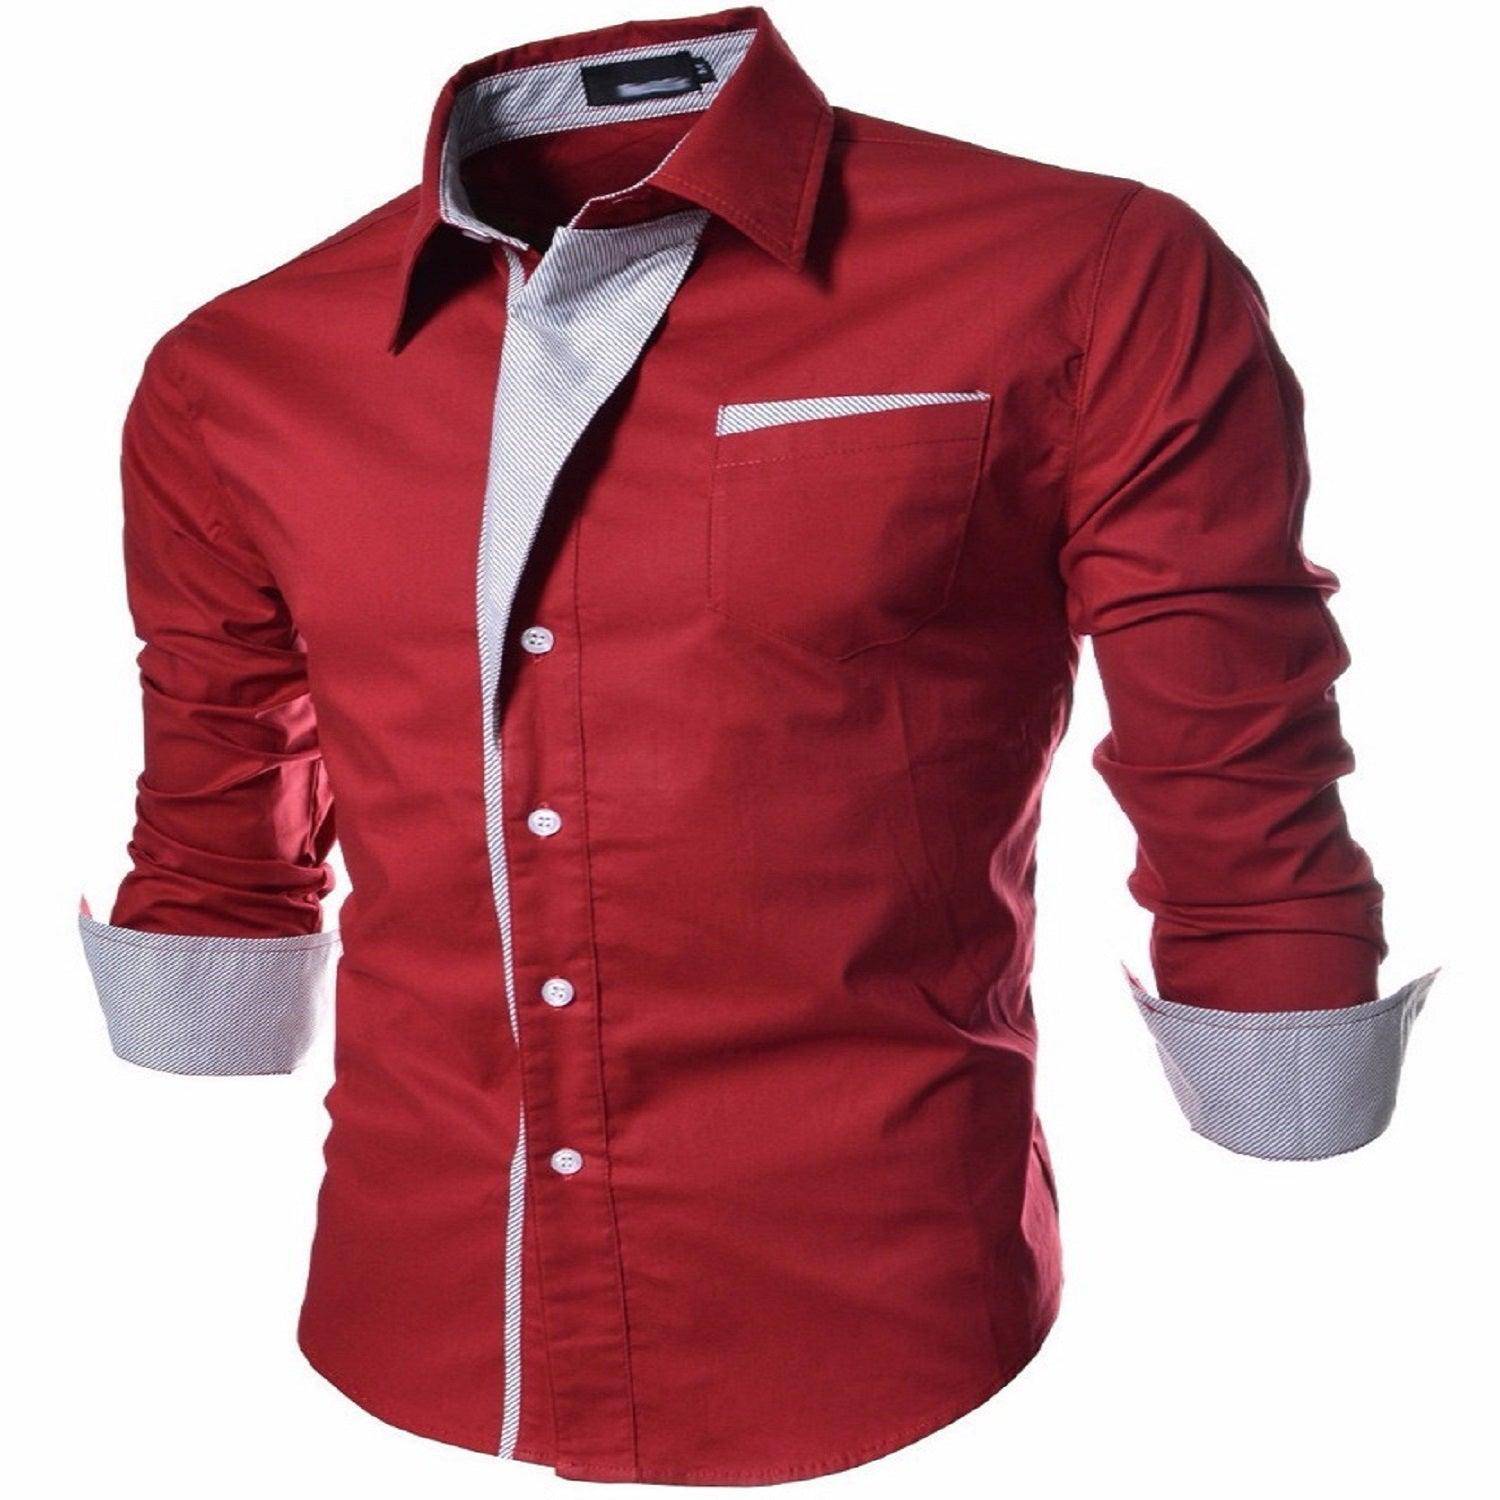 UDFABRIC Party-wear Shirt for Men's - Red - UD FABRIC - Your Style our Design